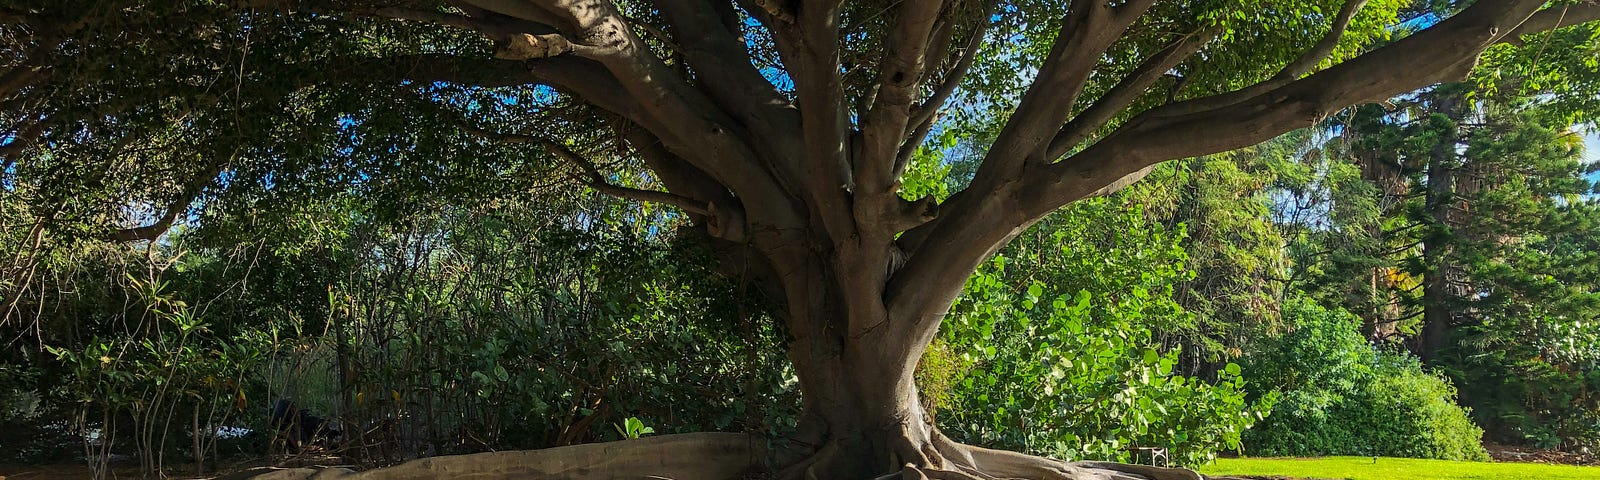 A large tree with extensive, visible roots spreading out across the ground, symbolizing the deep and far-reaching impact of actions and behaviors.